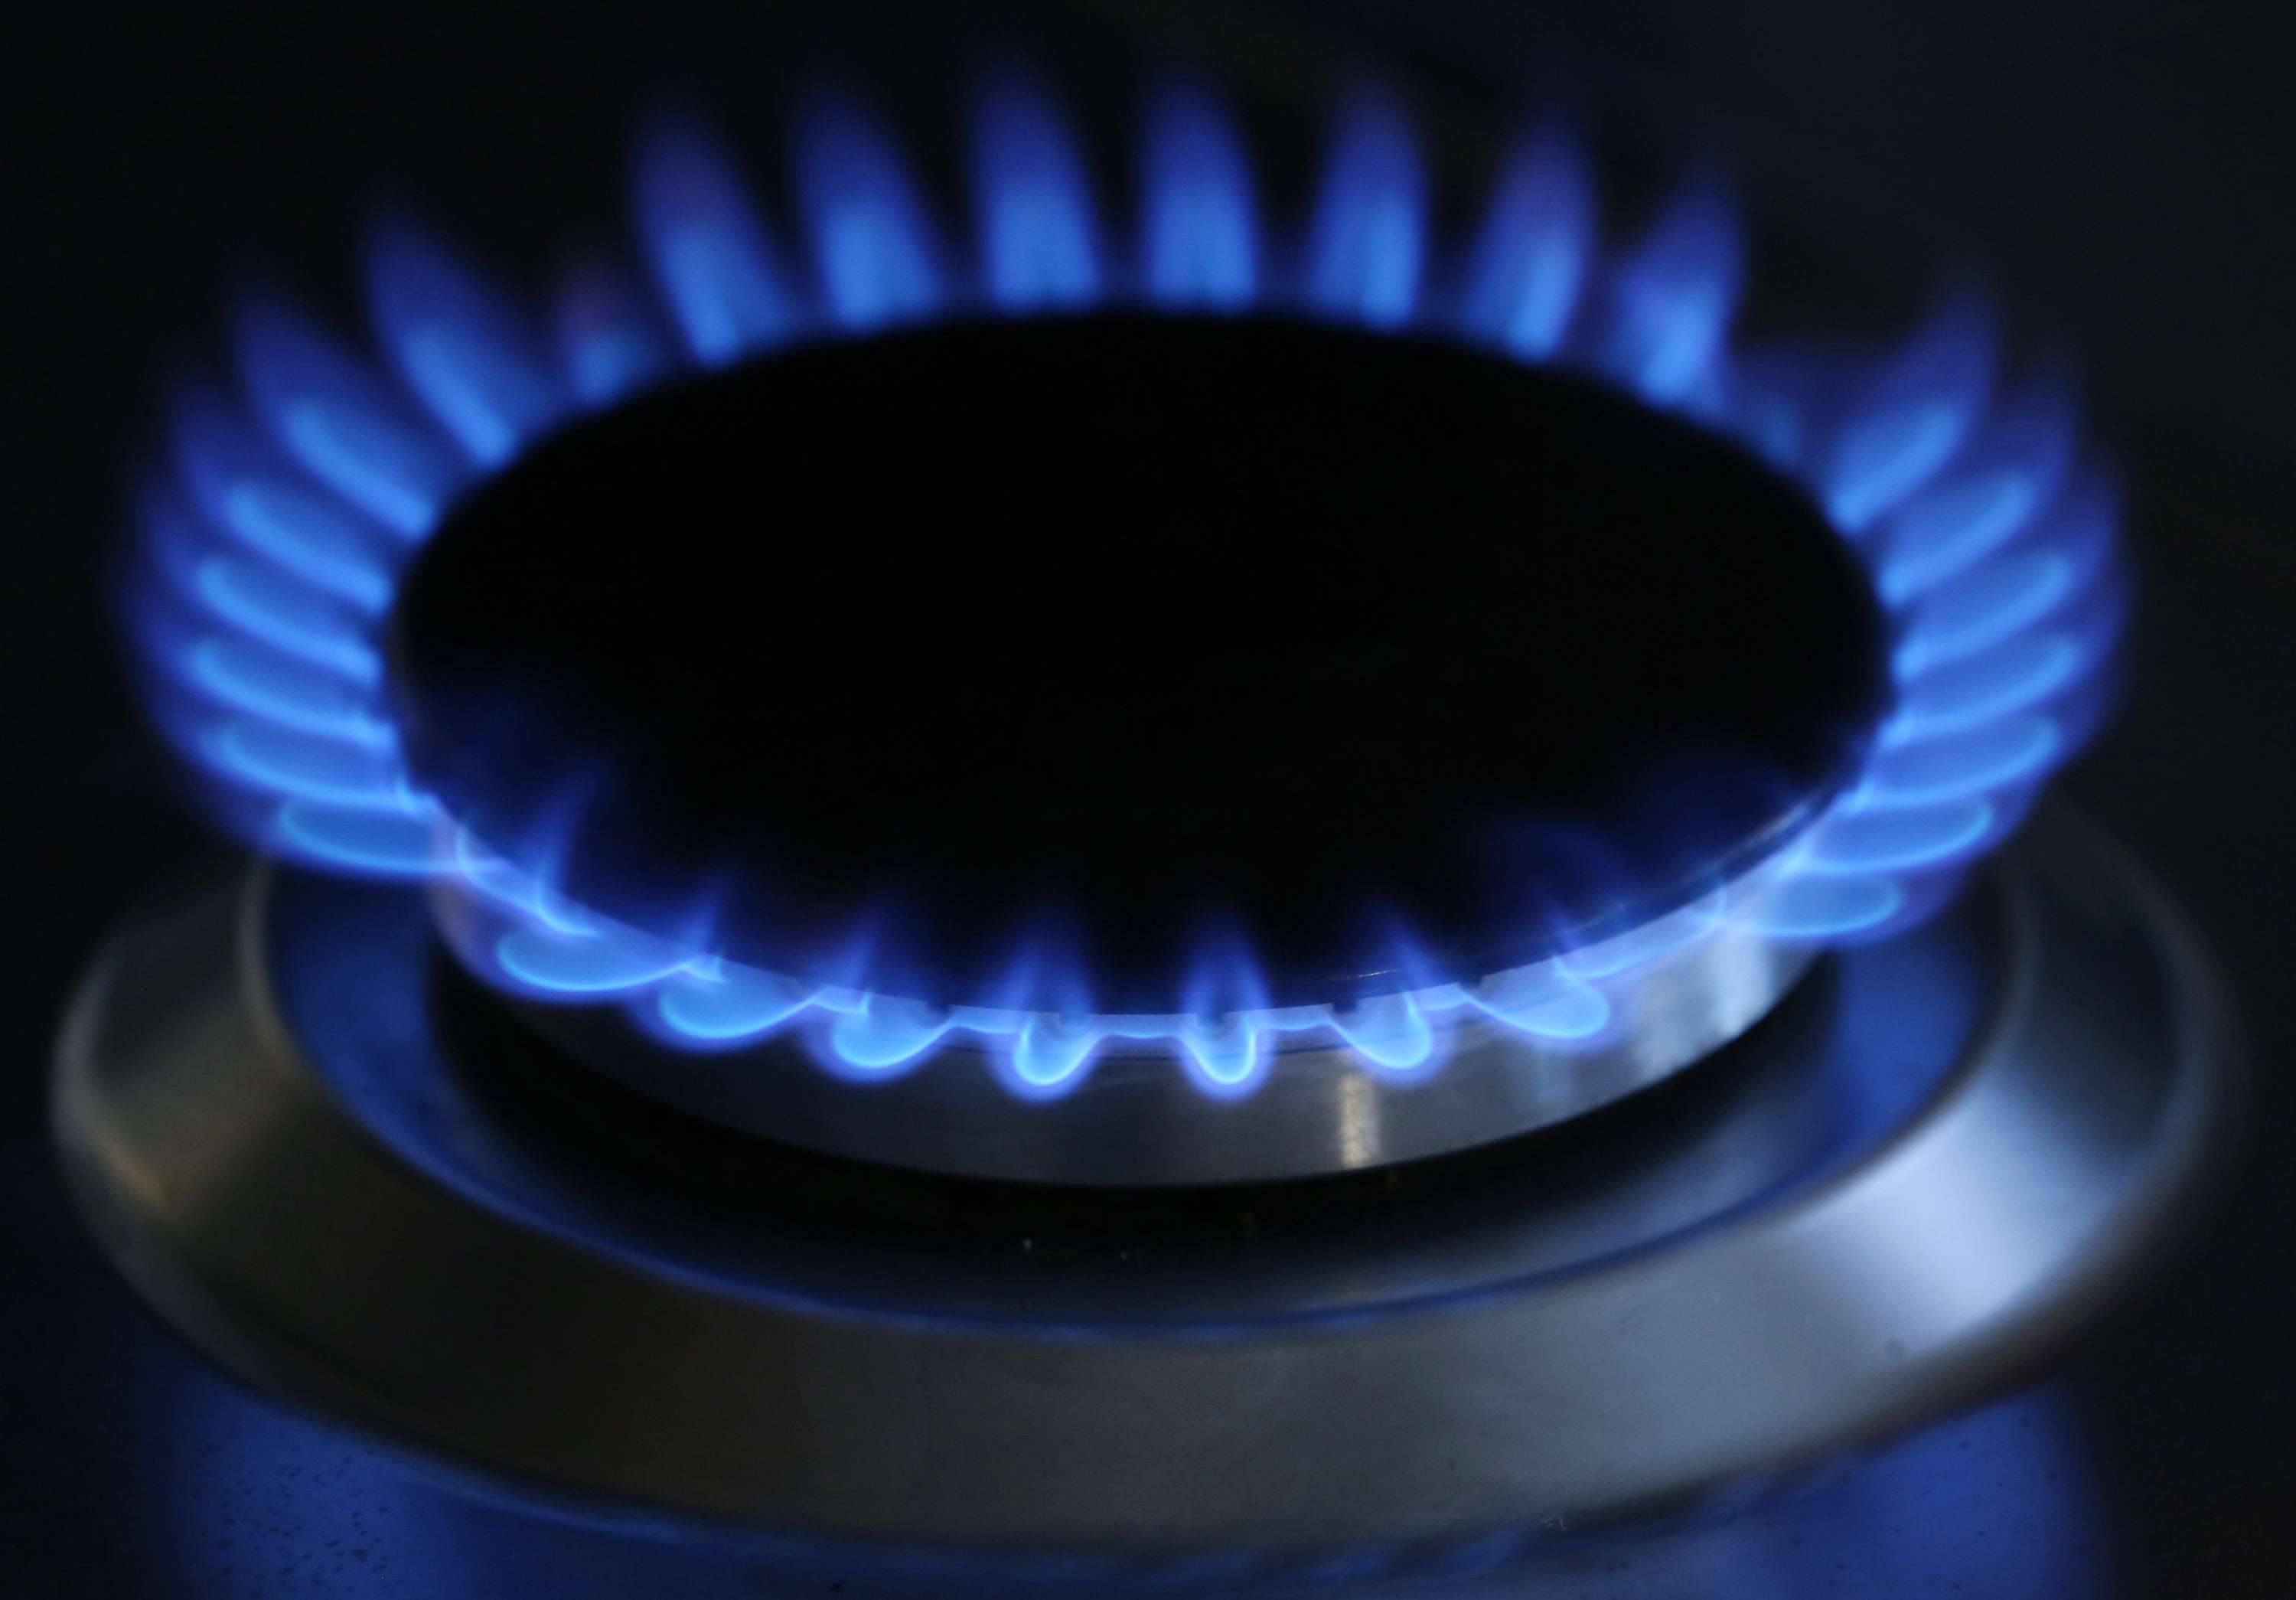 Energy bills for 22 million households might go up again in the next six months